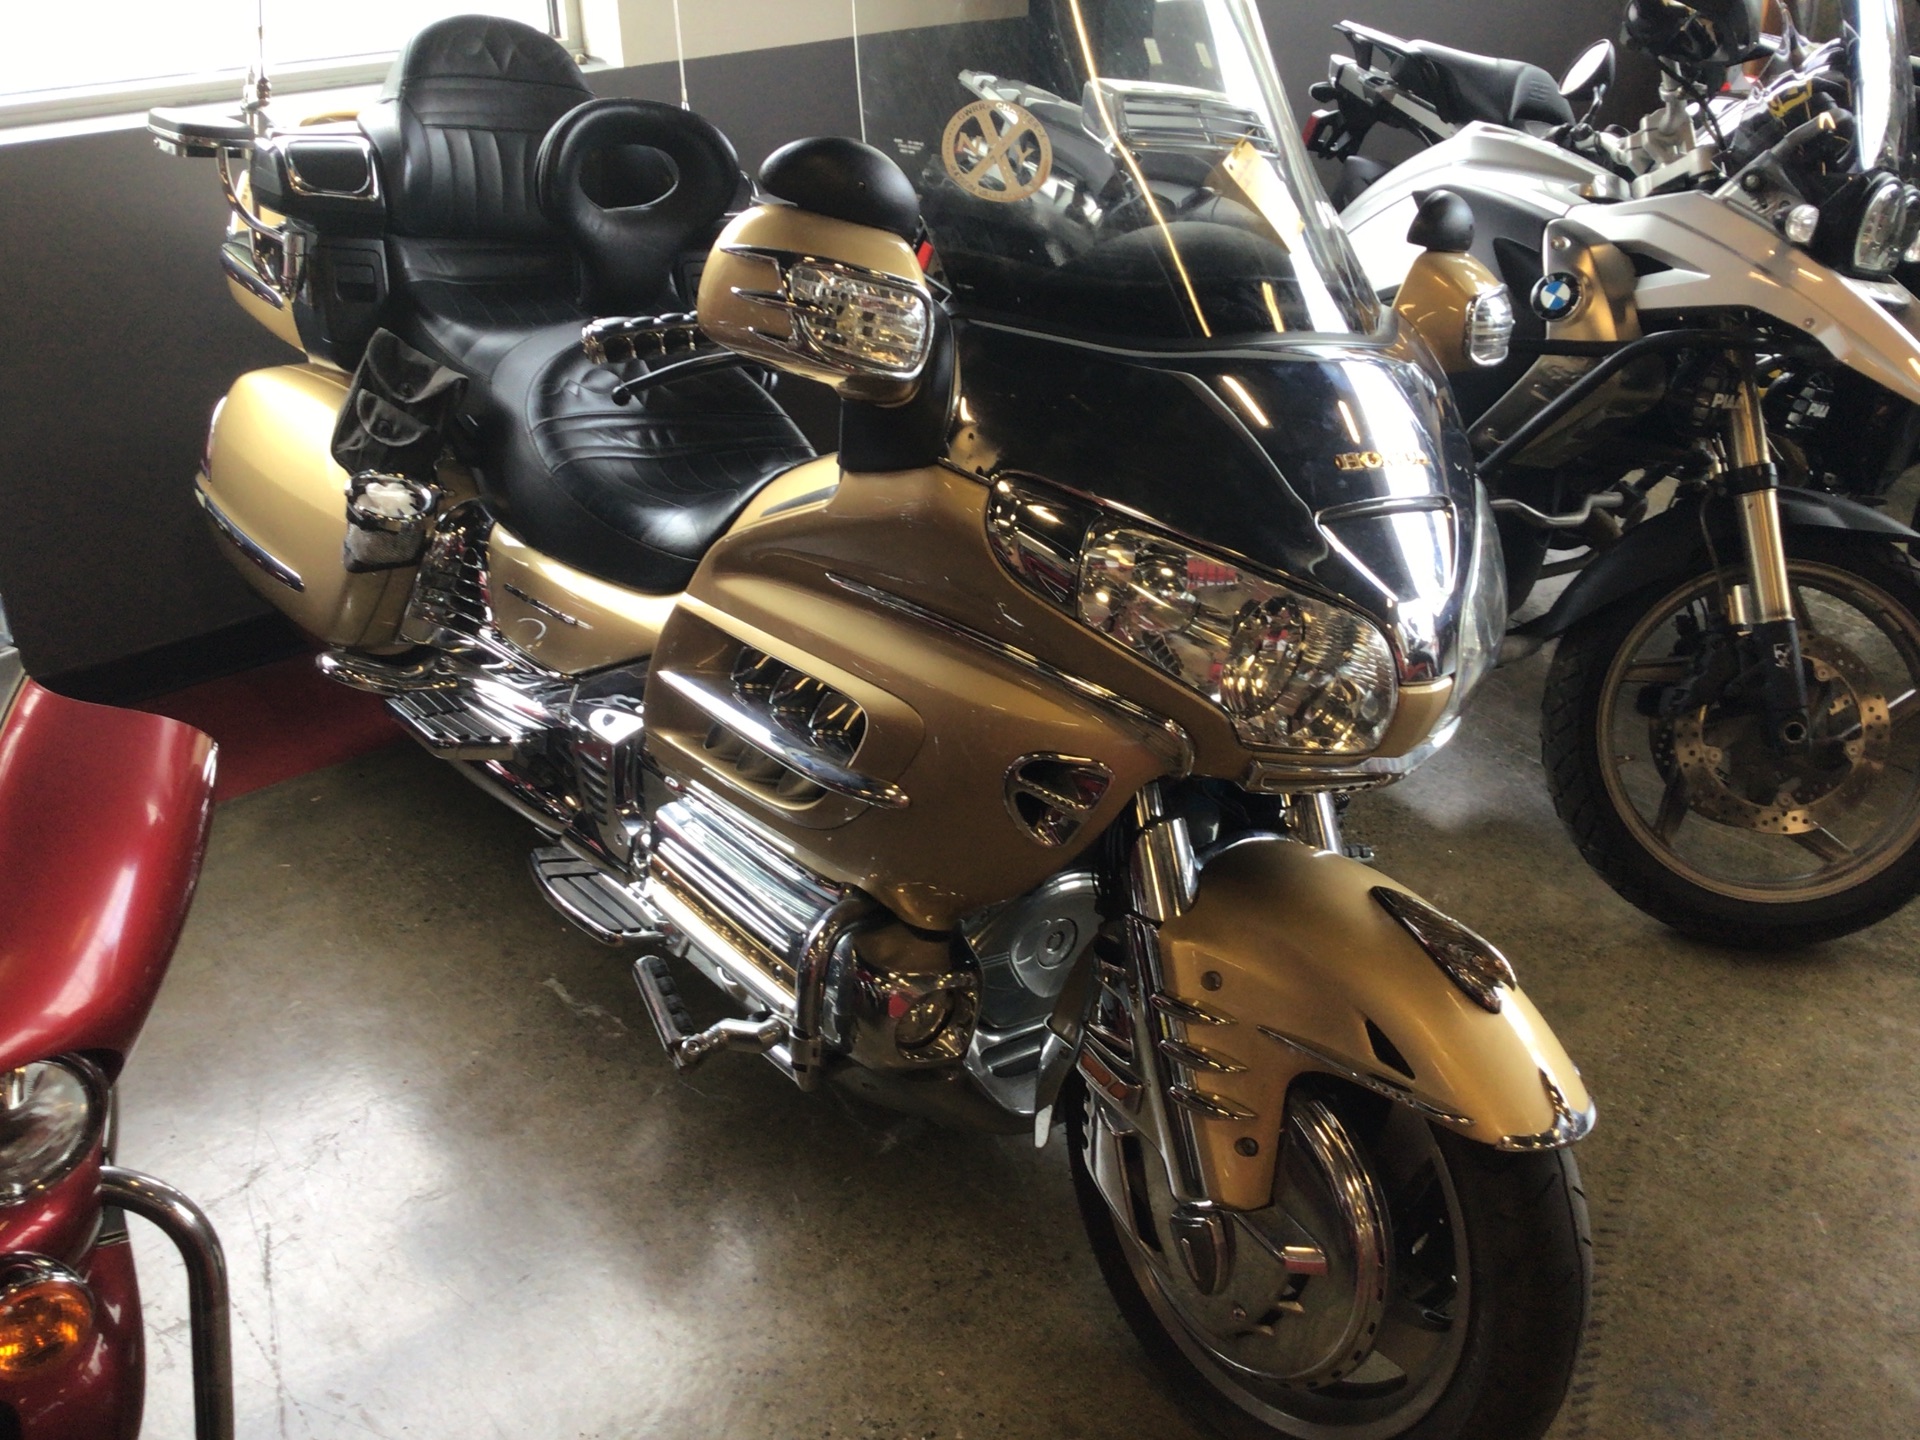 2006 Honda Gold Wing® Audio / Comfort in Middletown, New York - Photo 2